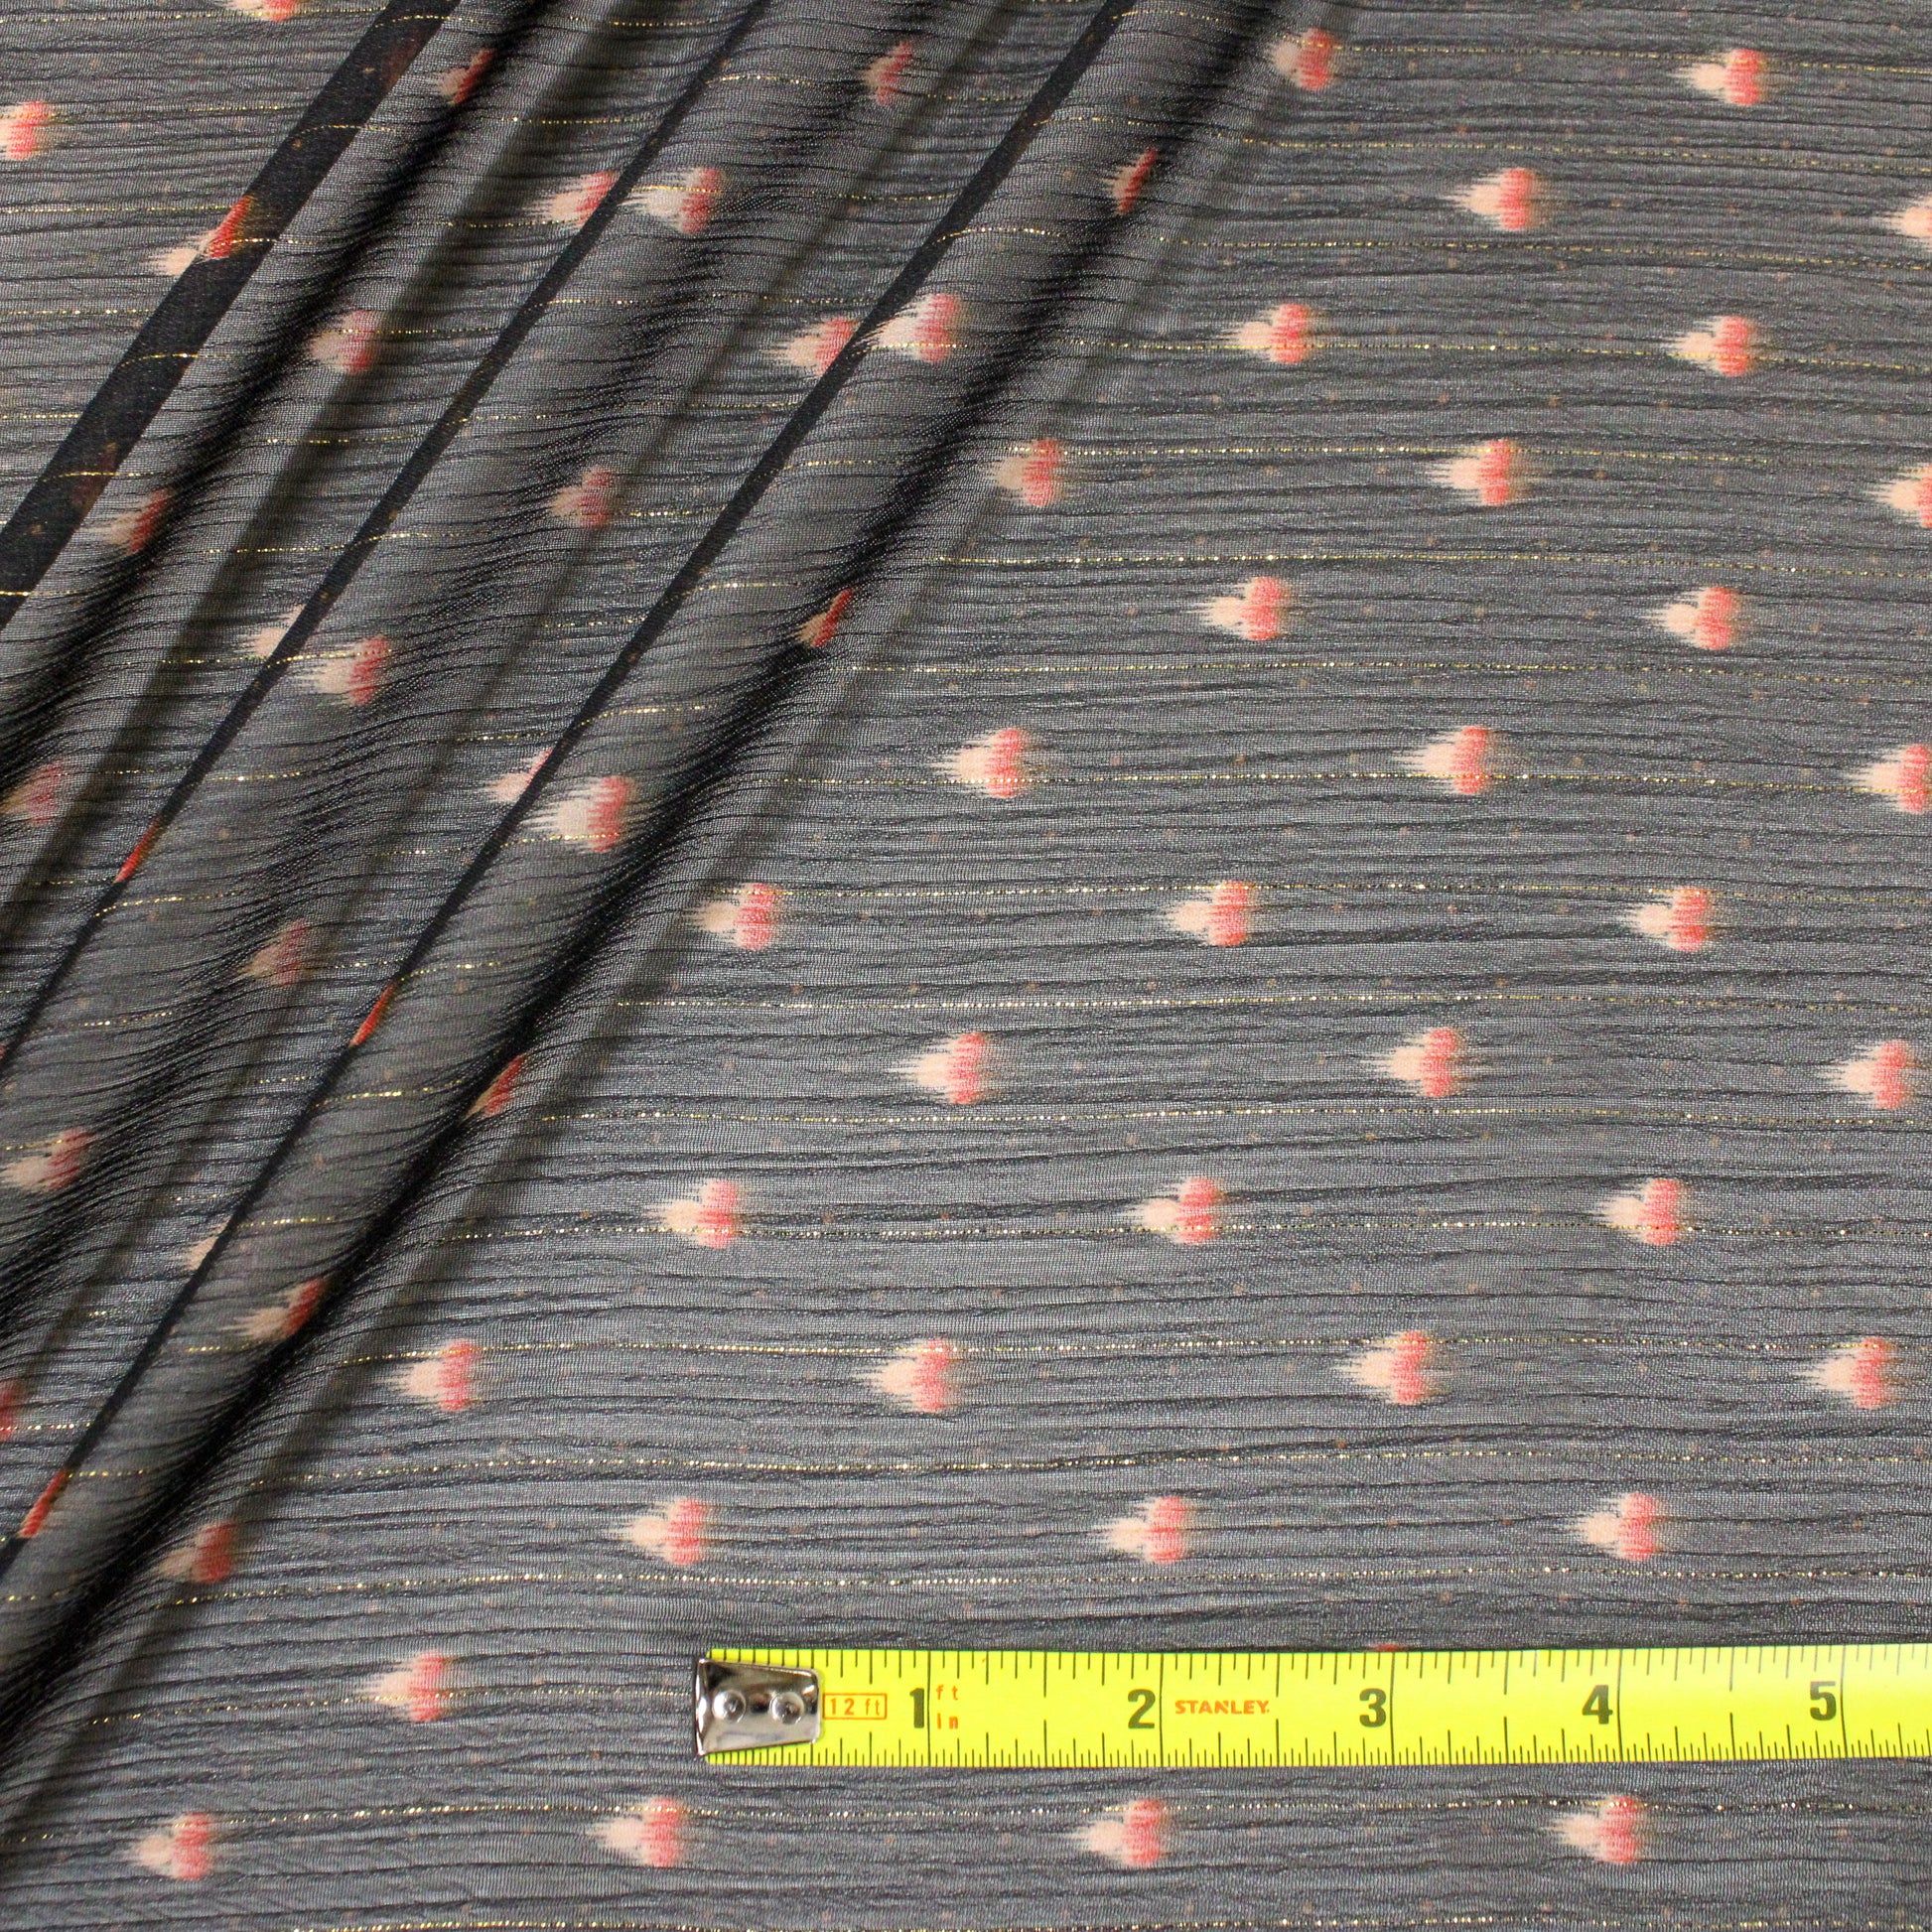 birds eye view of fabric with ruler showing the print repeats every 2 inches